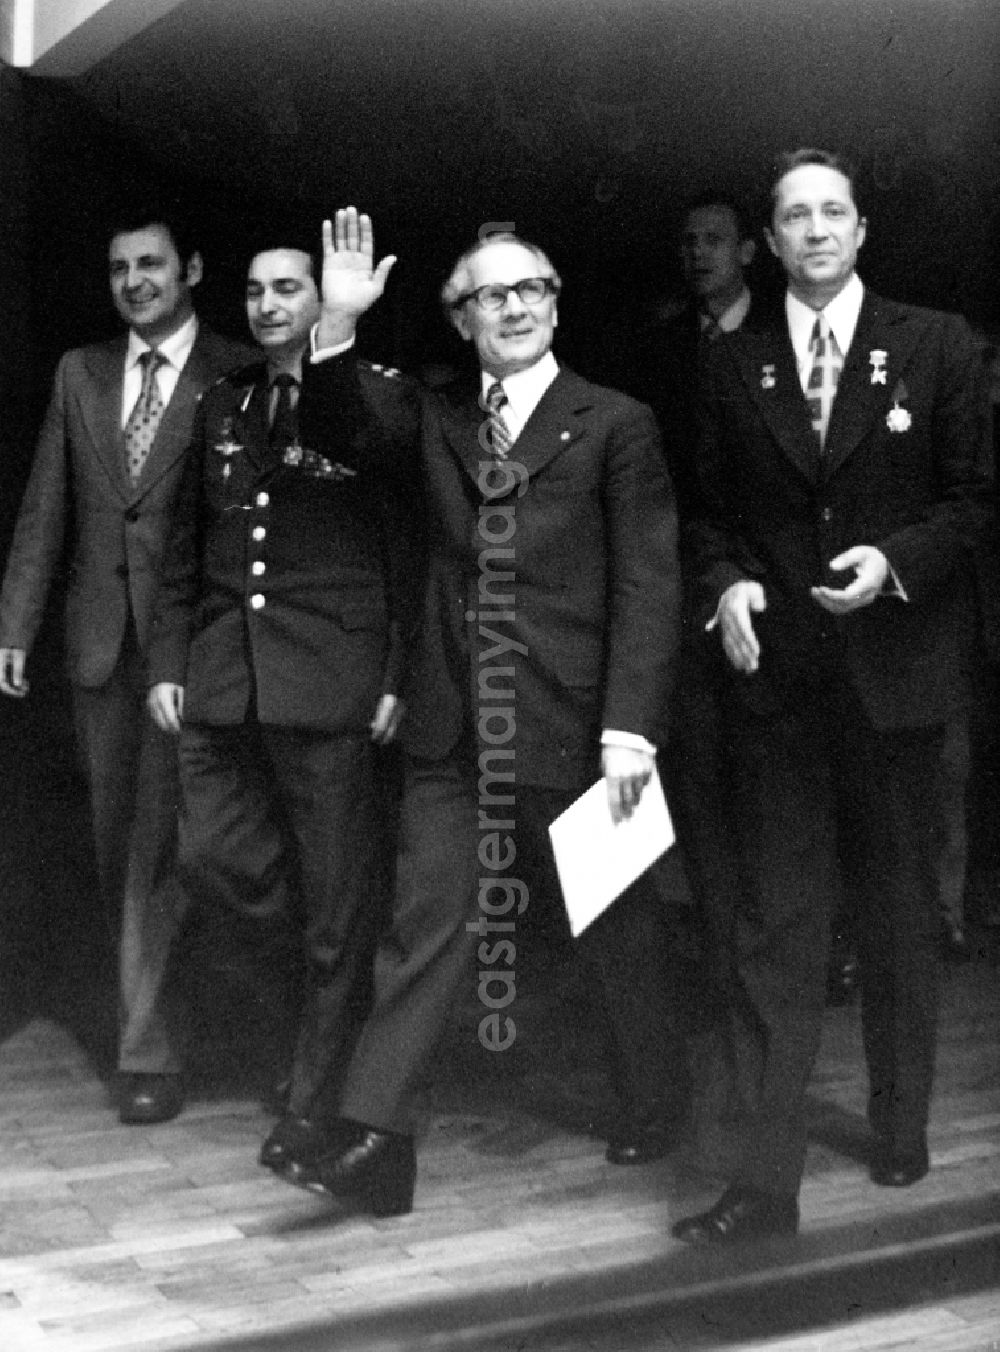 GDR photo archive: Berlin - State act and reception by astronaut Waleri Fjodorowitsch Bykowski by Erich Honecker in the district Mitte in Berlin, the former capital of the GDR, German Democratic Republic